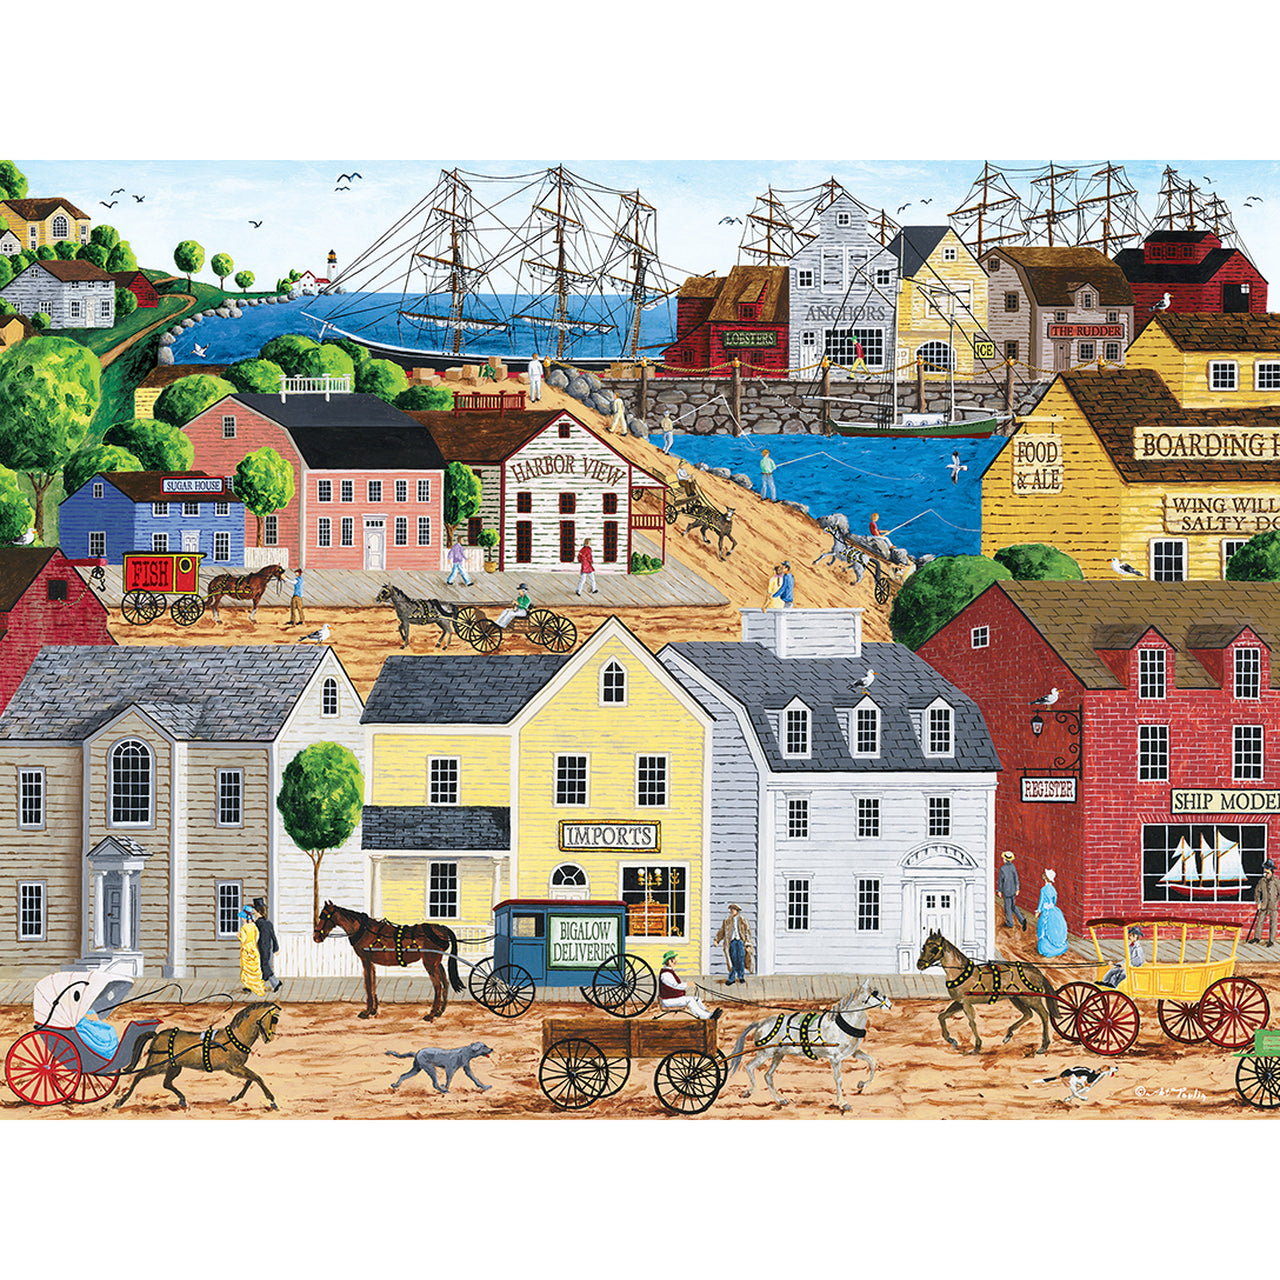 Town & Country Home Port - Large 300 Piece EZGrip Jigsaw Puzzle by Mastrepieces